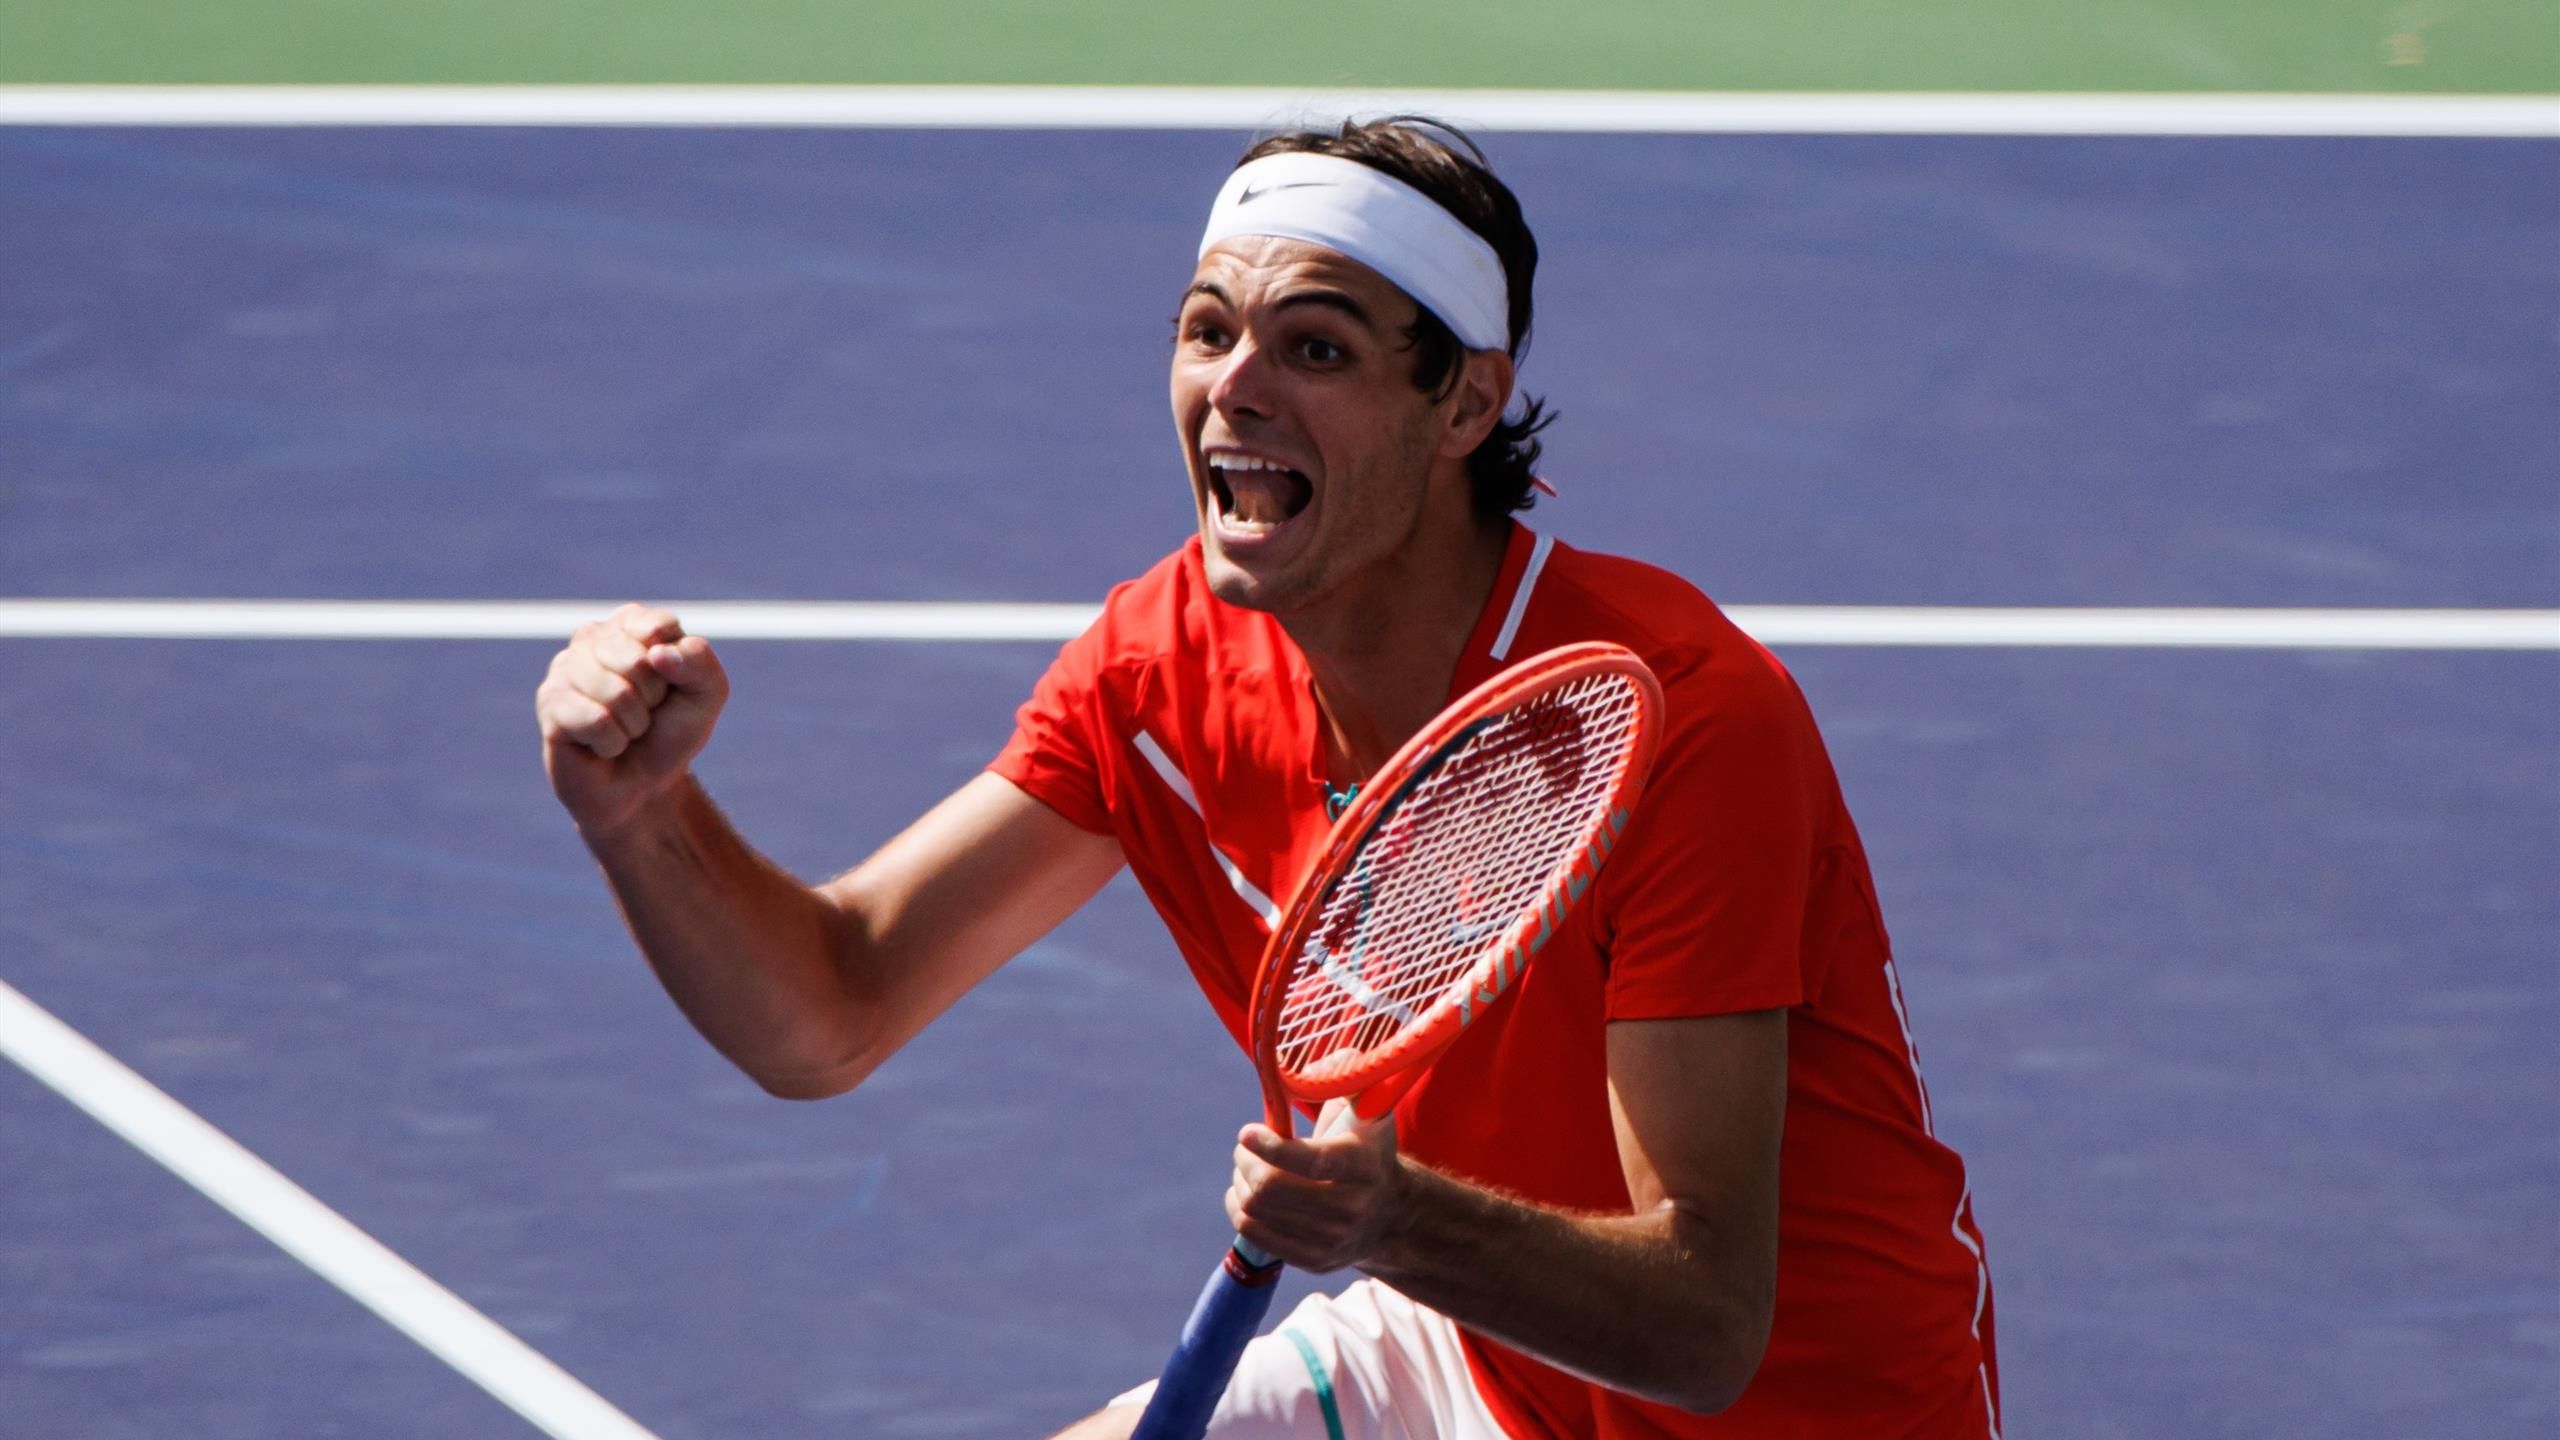 Taylor Fritz to play Rafael Nadal in his first Masters final appearance after stunning Andrey Rublev at Indian Wells